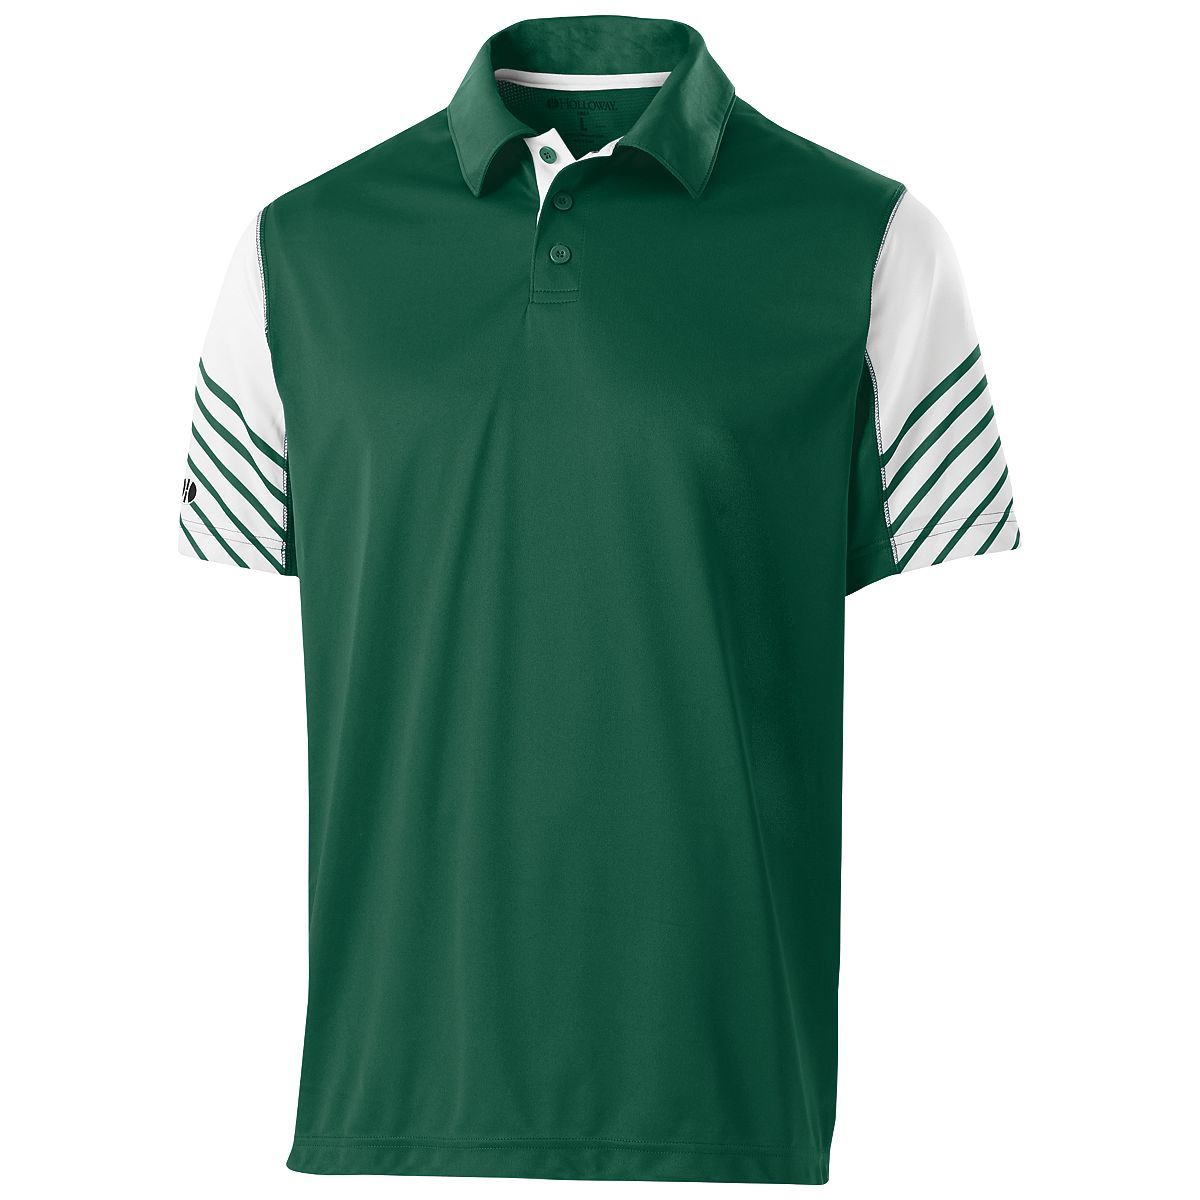 Holloway Arc Polo in Forest/White  -Part of the Adult, Adult-Polos, Polos, Holloway, Shirts product lines at KanaleyCreations.com